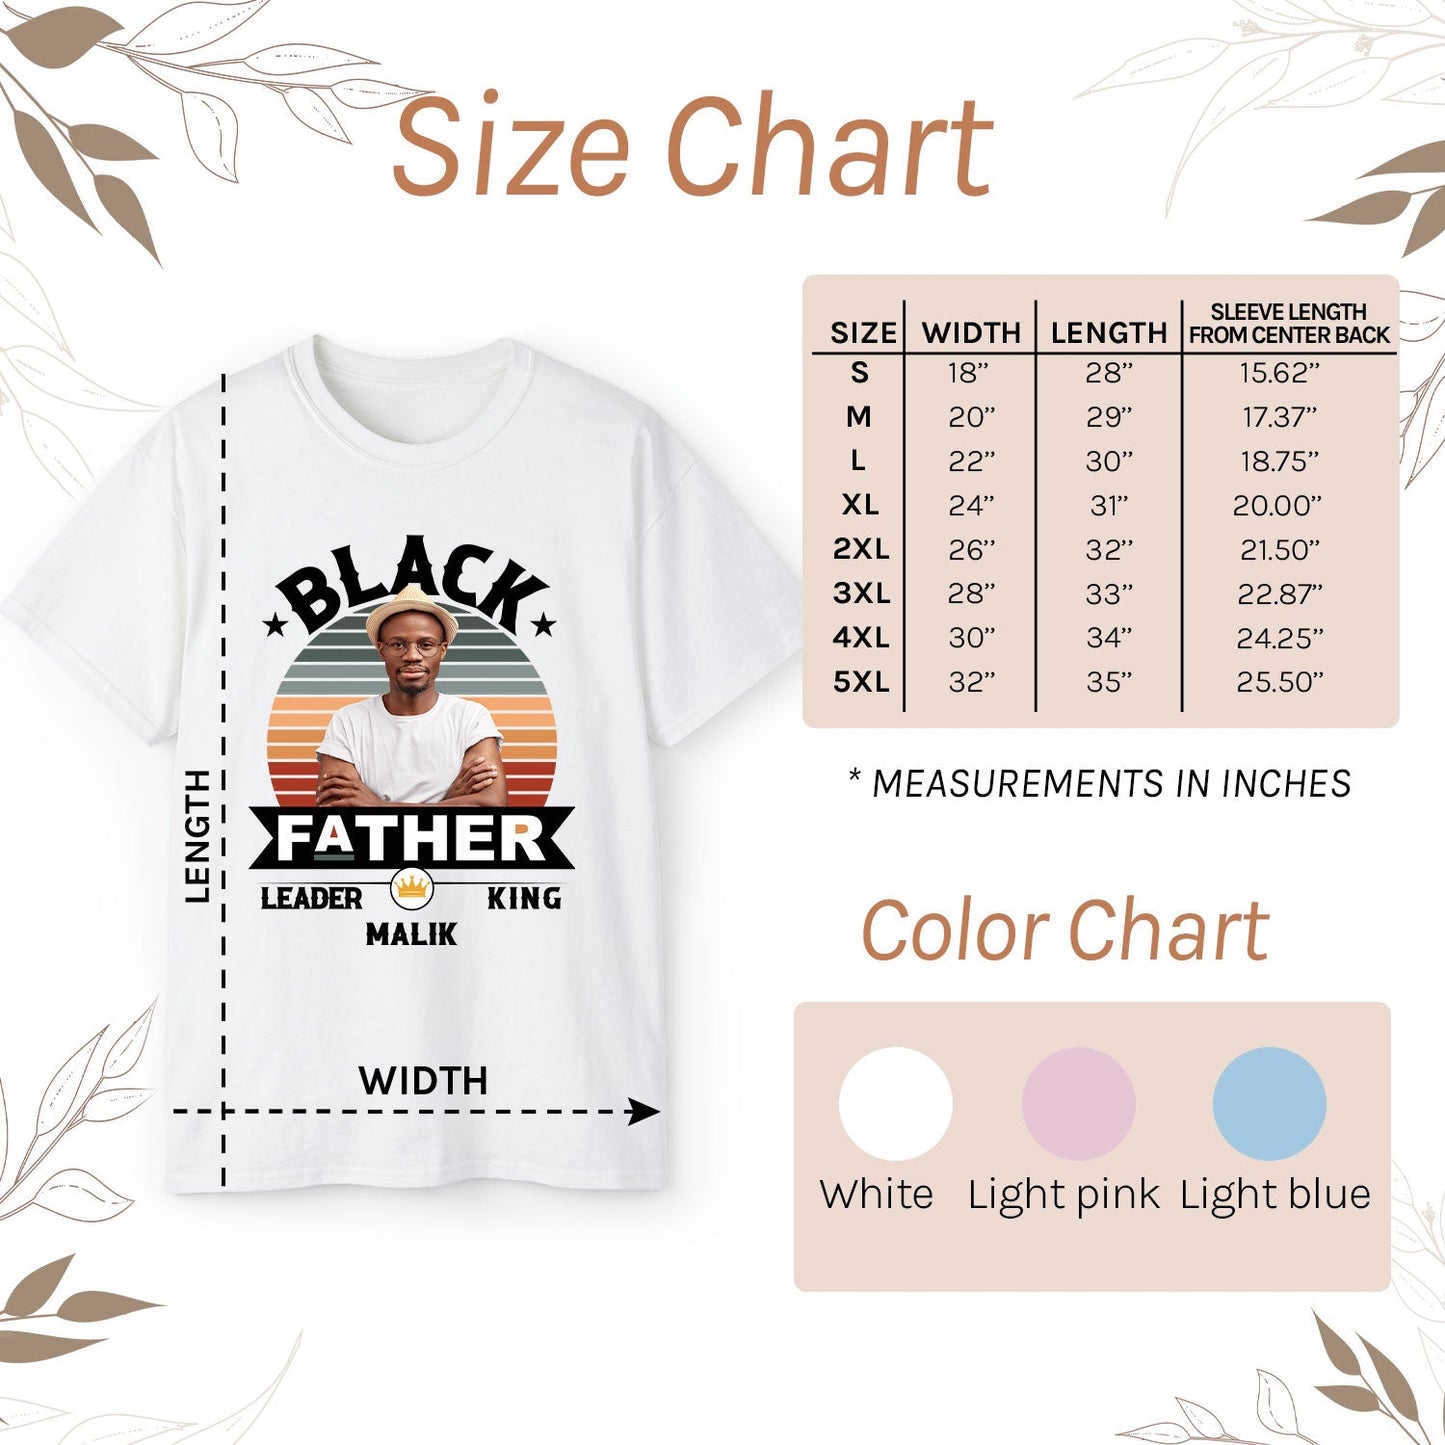 Black Father - Personalized  gift For Black Dad - Custom Tshirt - MyMindfulGifts